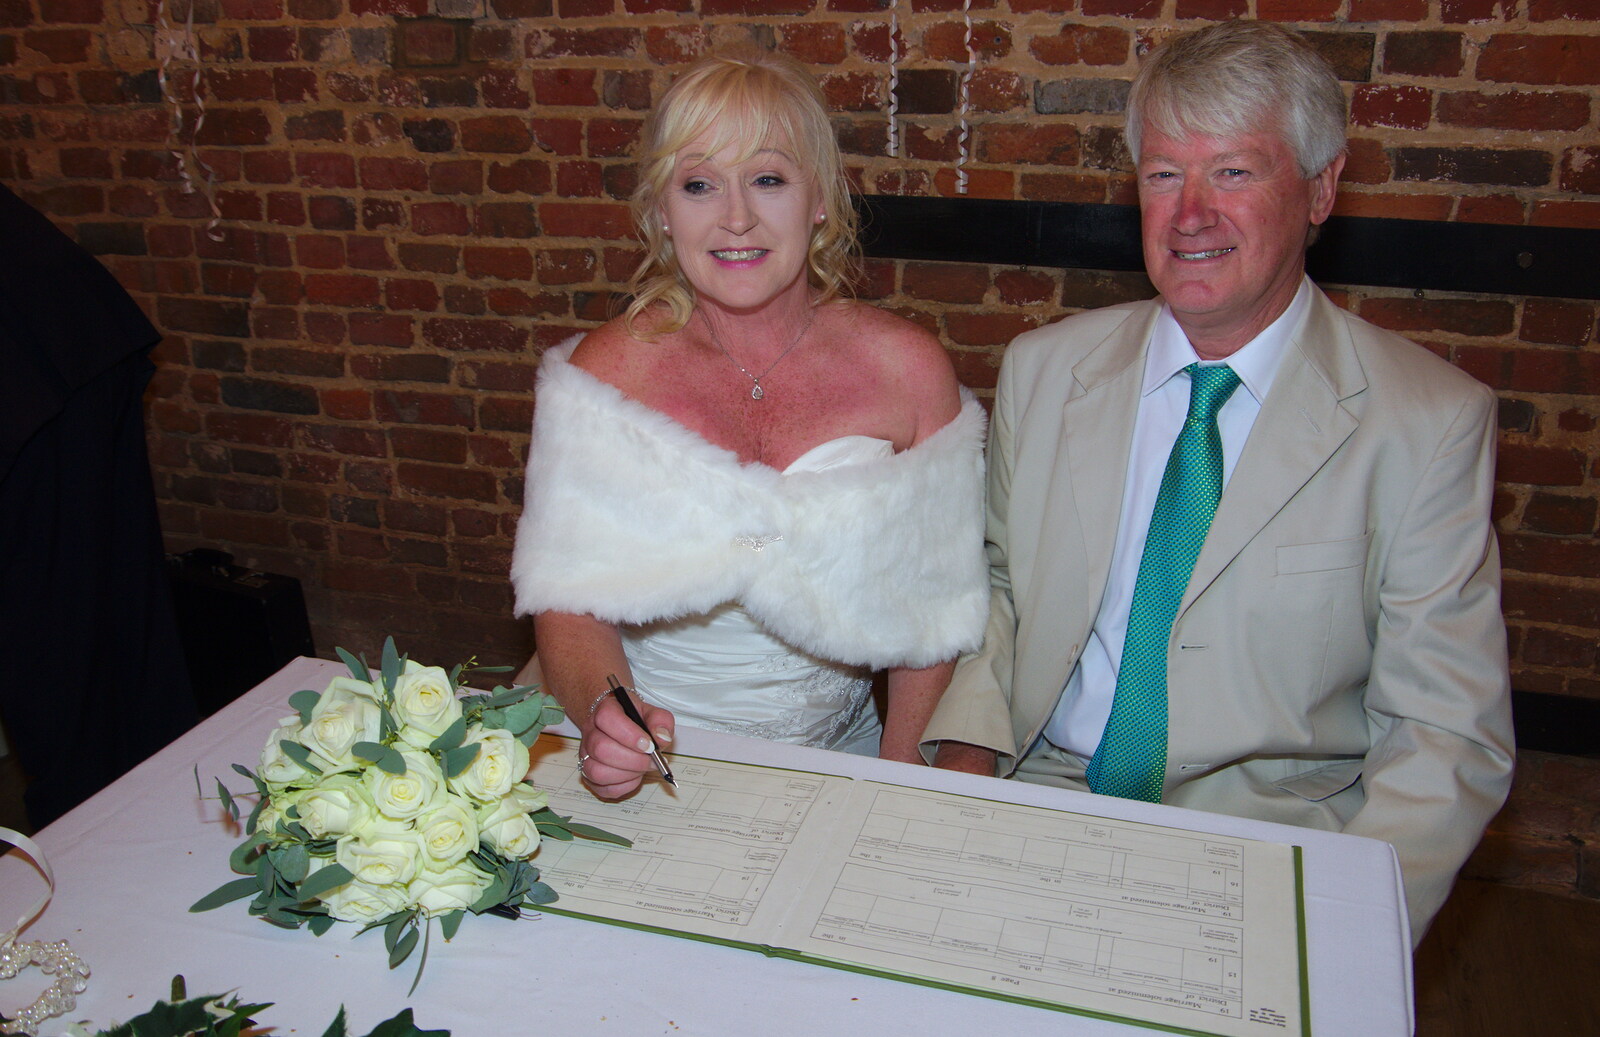 The signing of the register from Neil and Martina's Wedding, The Three Tuns, Bransgore, Dorset - 20th September 2019